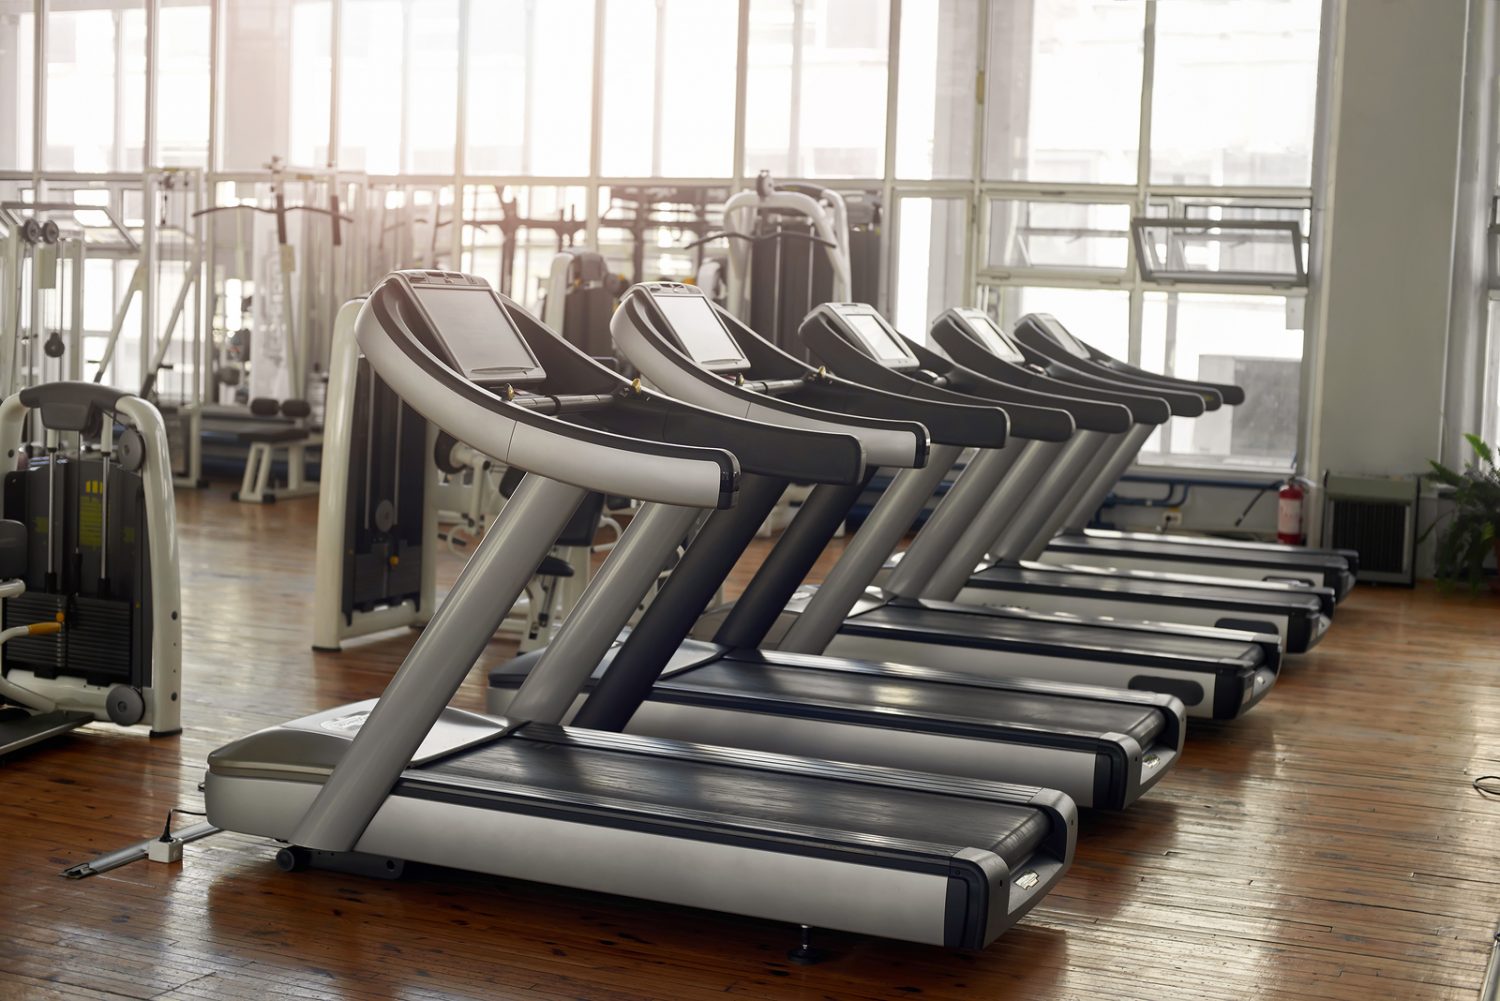 Gym interior with sport equipment. Treadmill at modern gym. Equipment for cardio training.